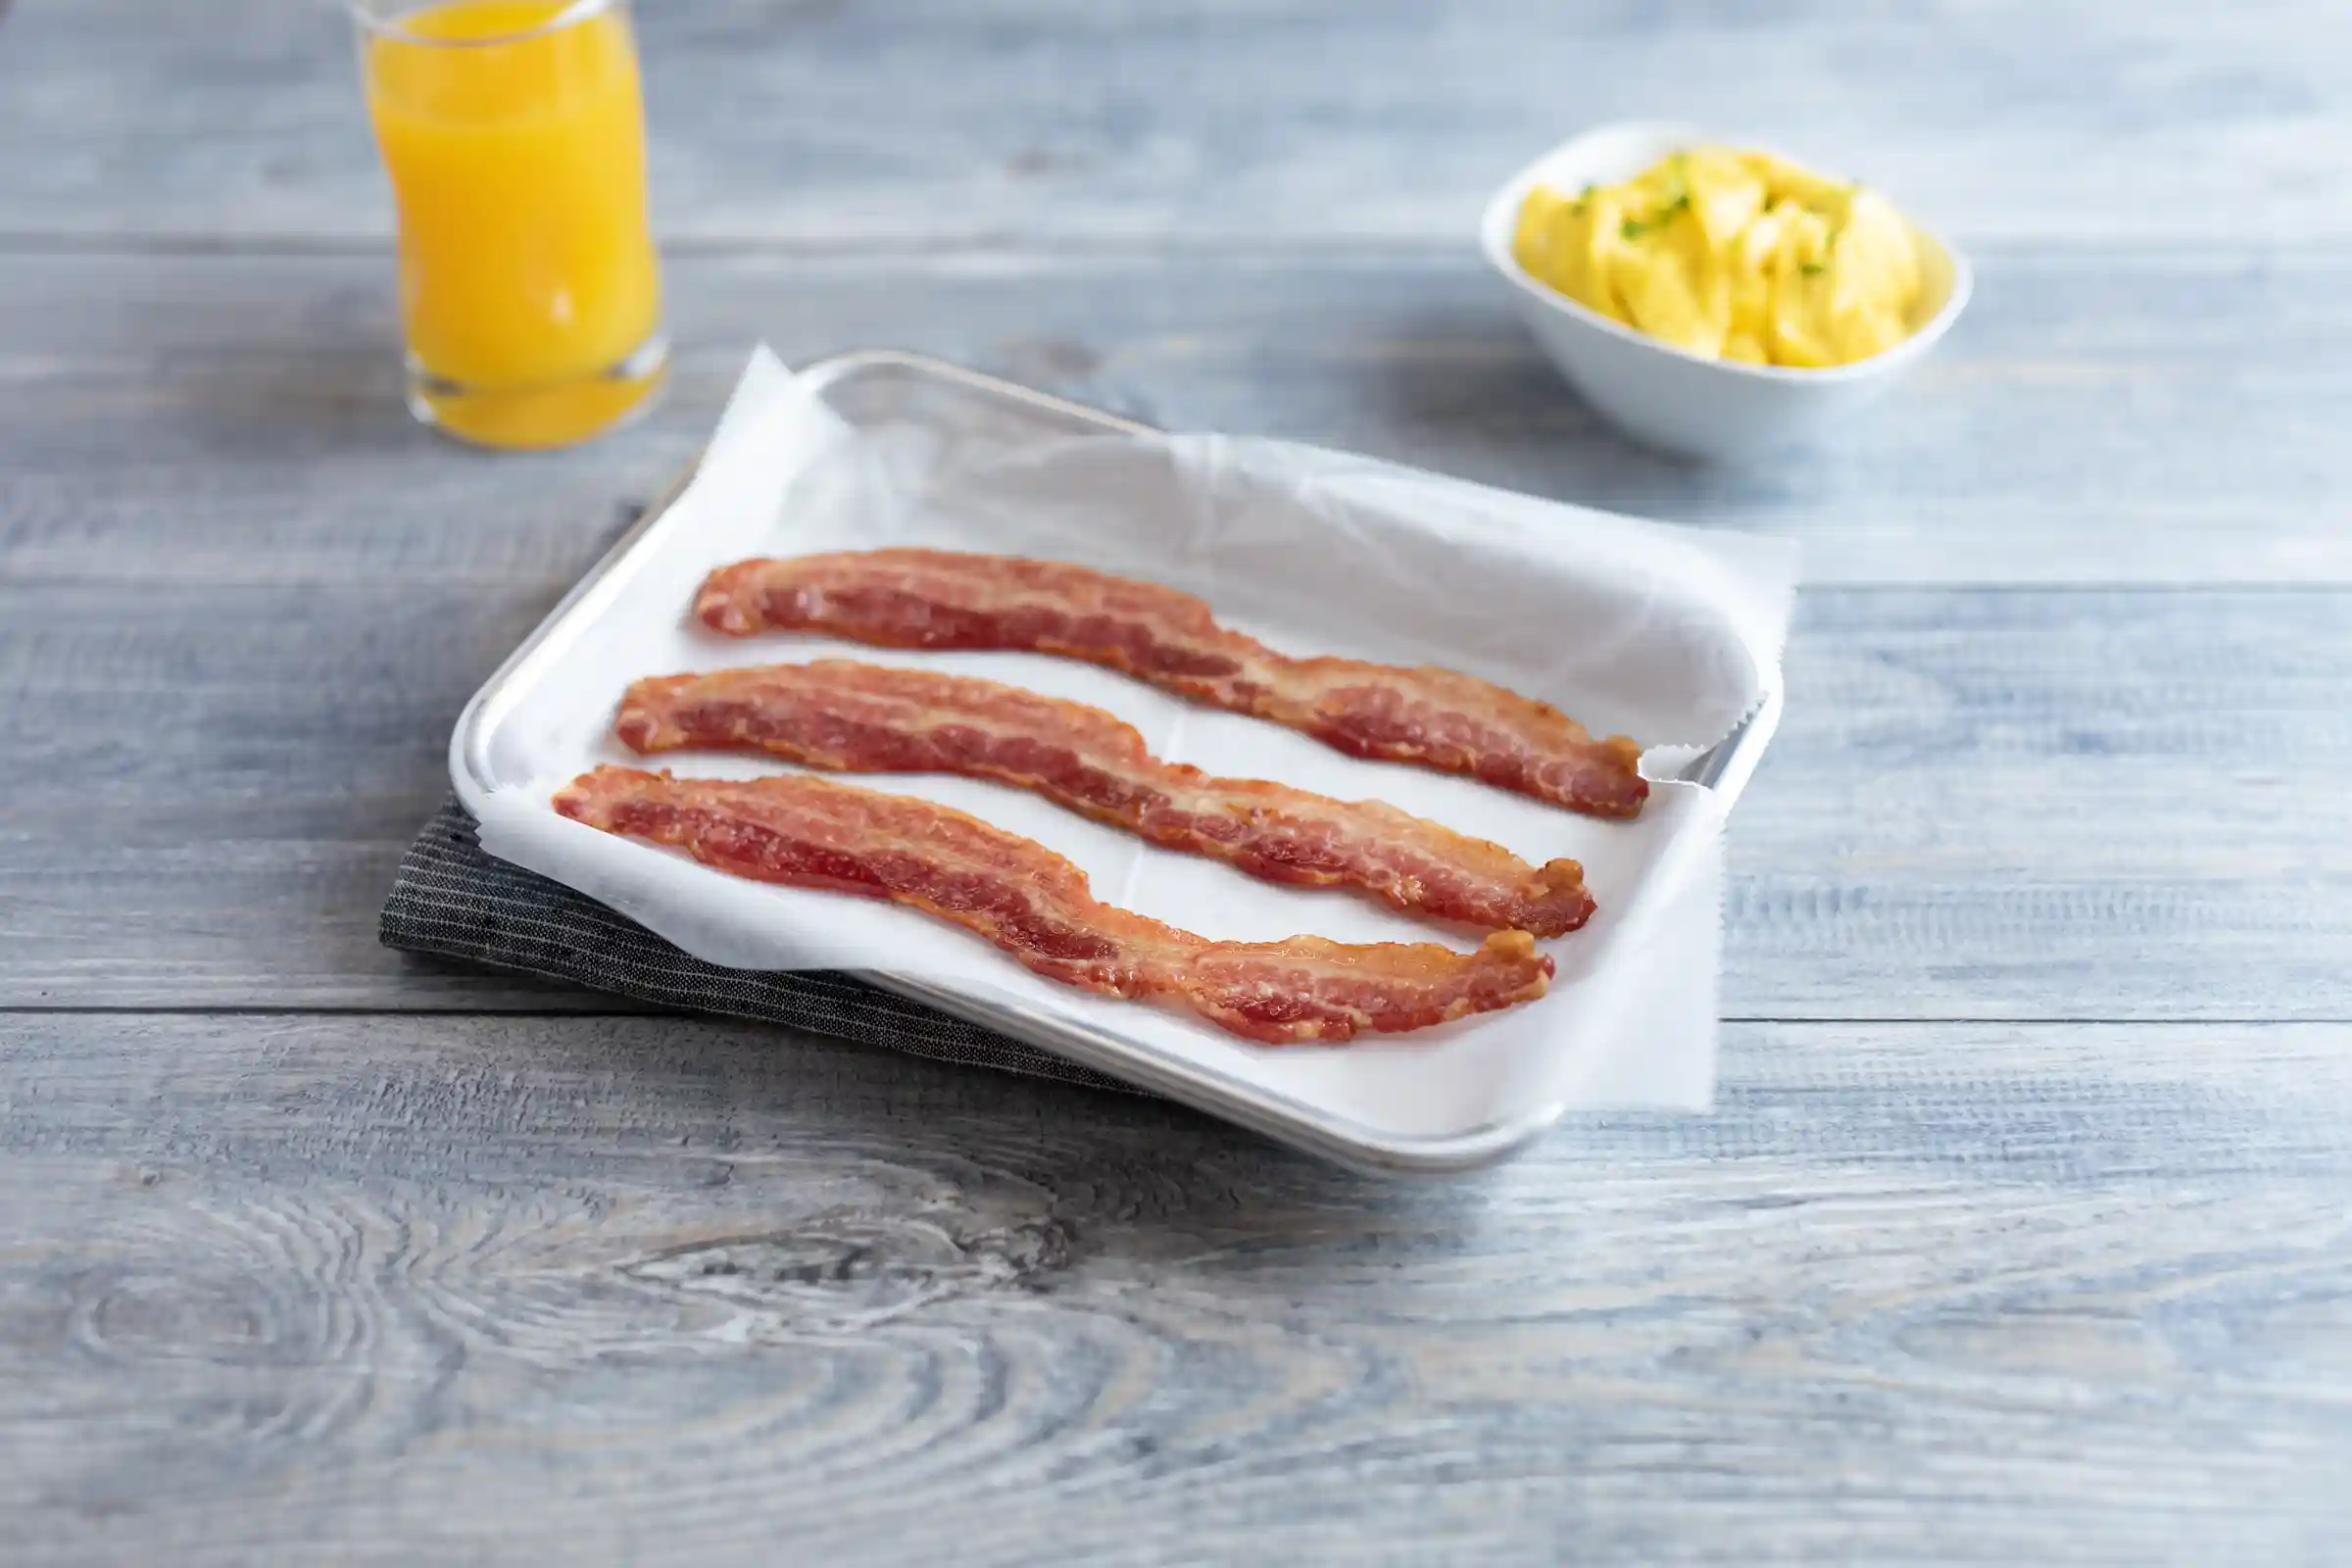 Wright® Brand Naturally Applewood Smoked Thick Sliced Bacon, Bulk, 15 Lbs, 10-14 Slices per Pound, Gas Flushed_image_11